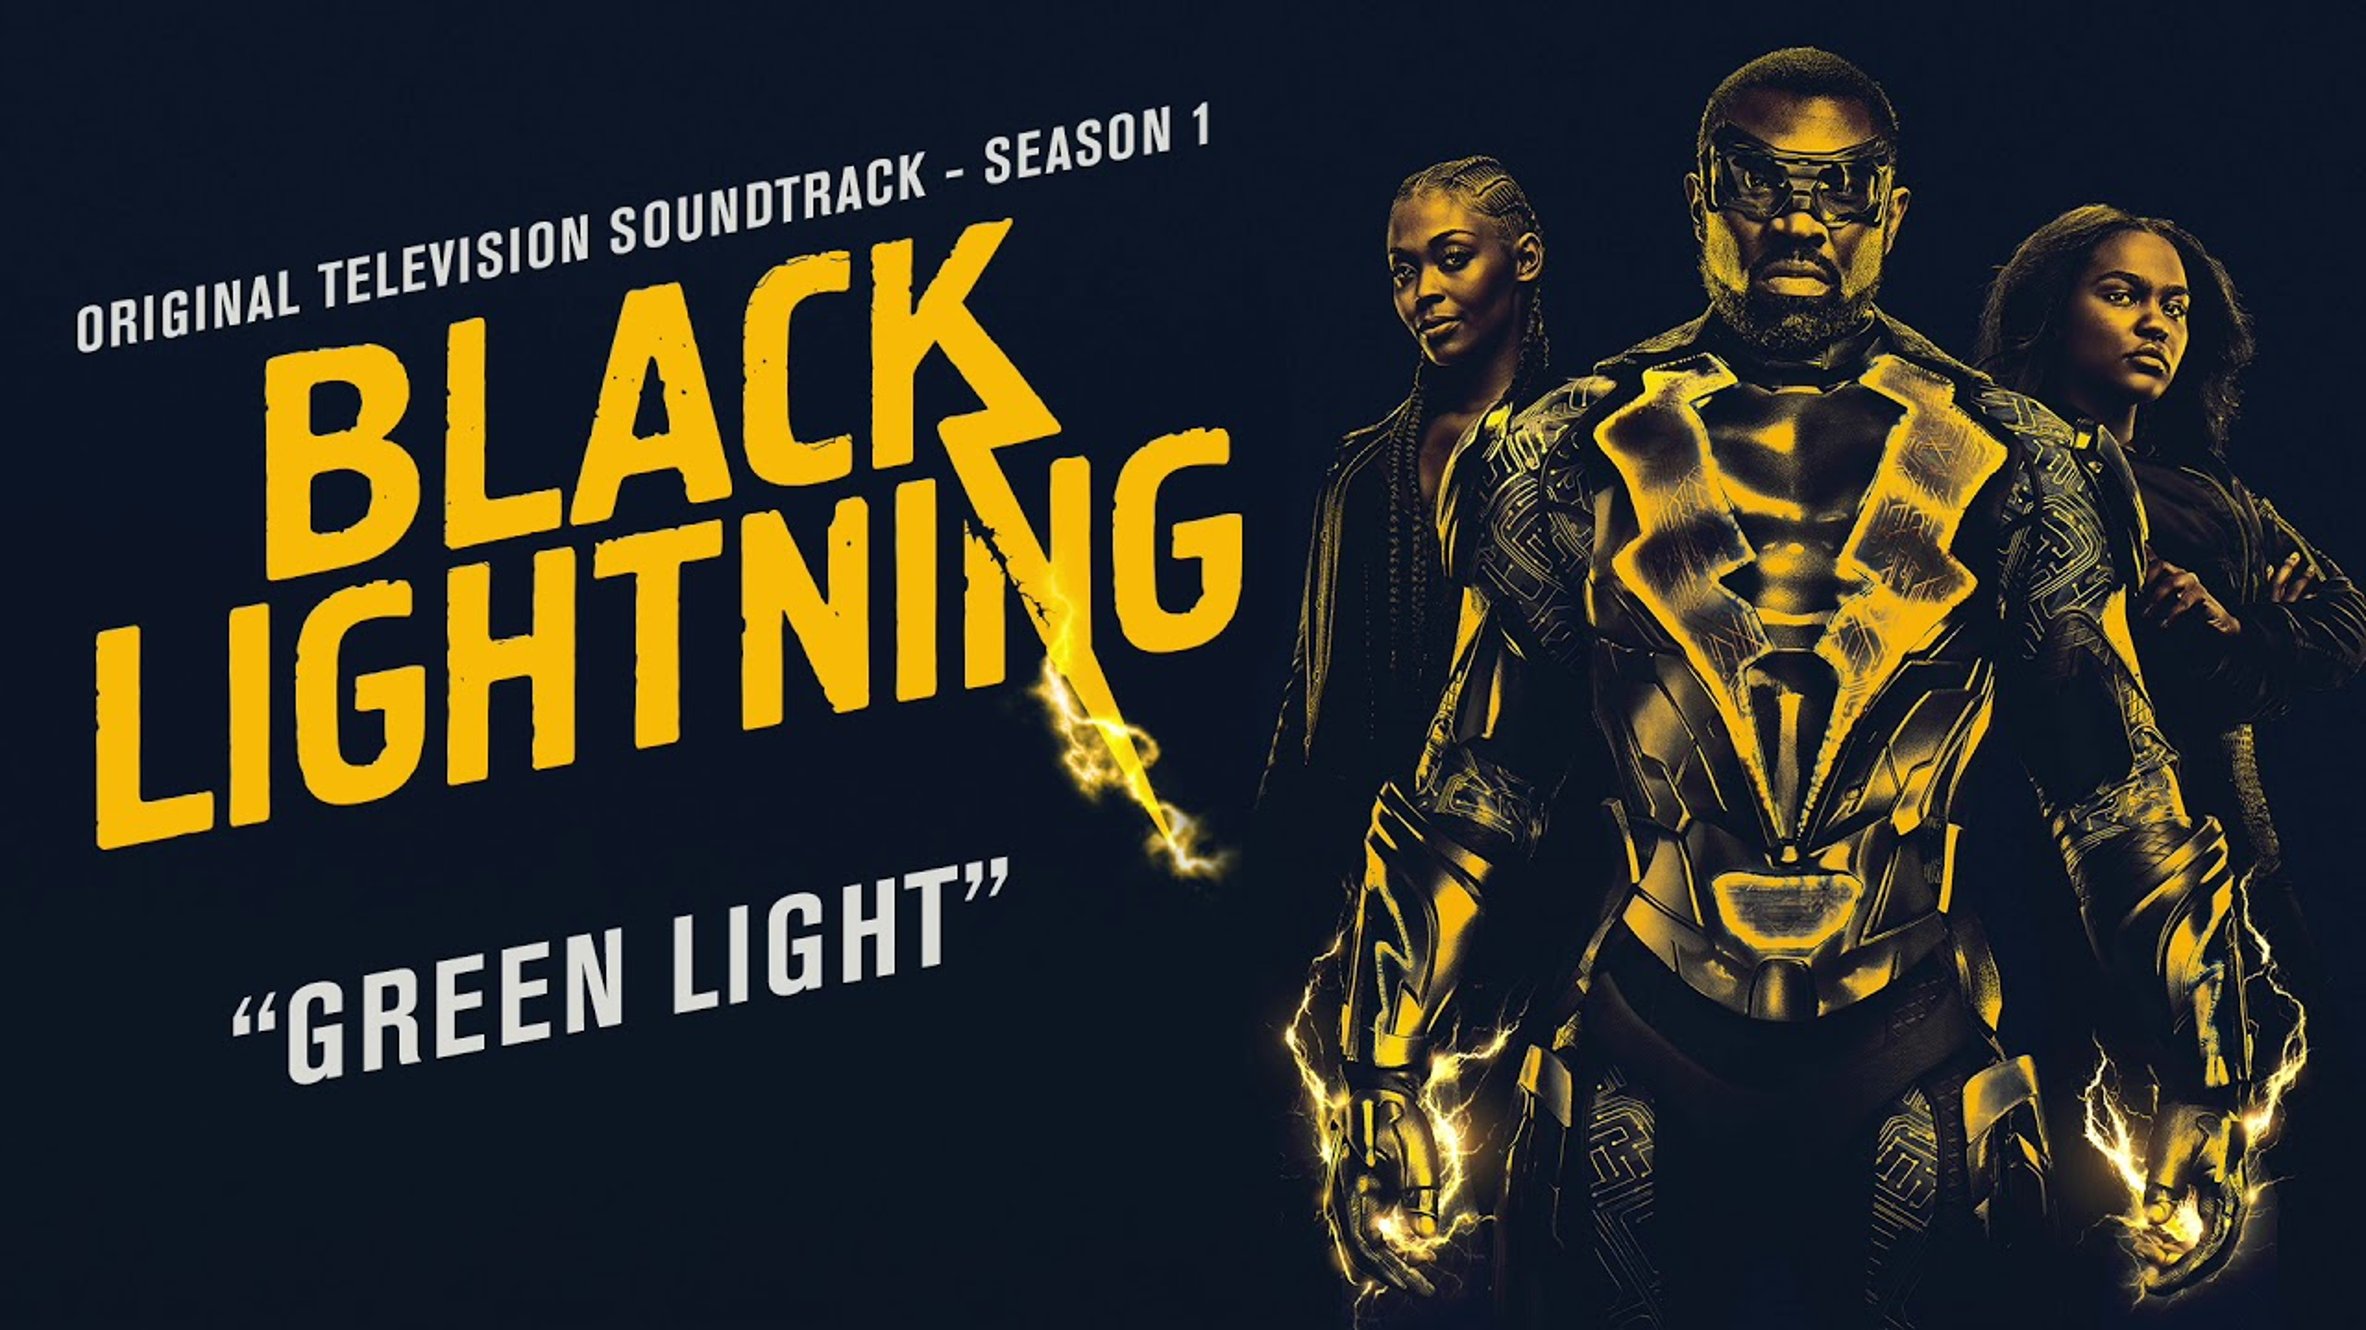 Casting A Featured Guard Role For CW's Black Lightning!